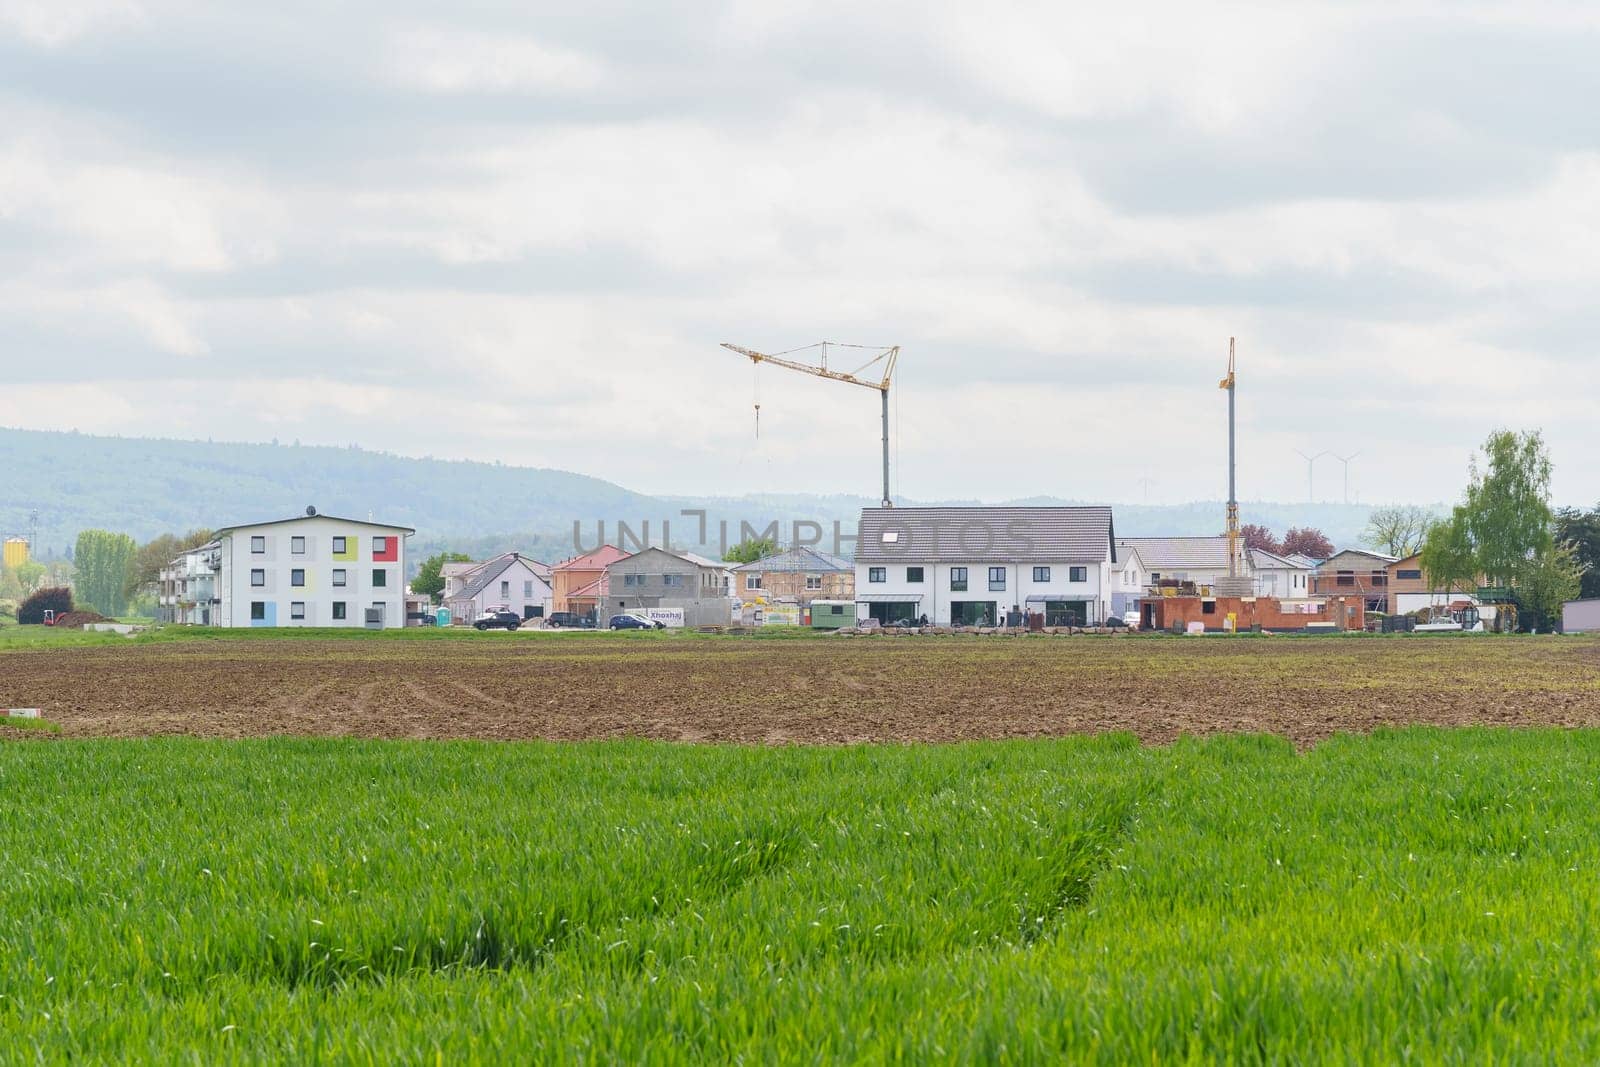 Schuttern, Germany - April 29, 2023: A view of a new housing development with a construction crane in the background, a field of grass in the foreground, and a cloudy sky above.